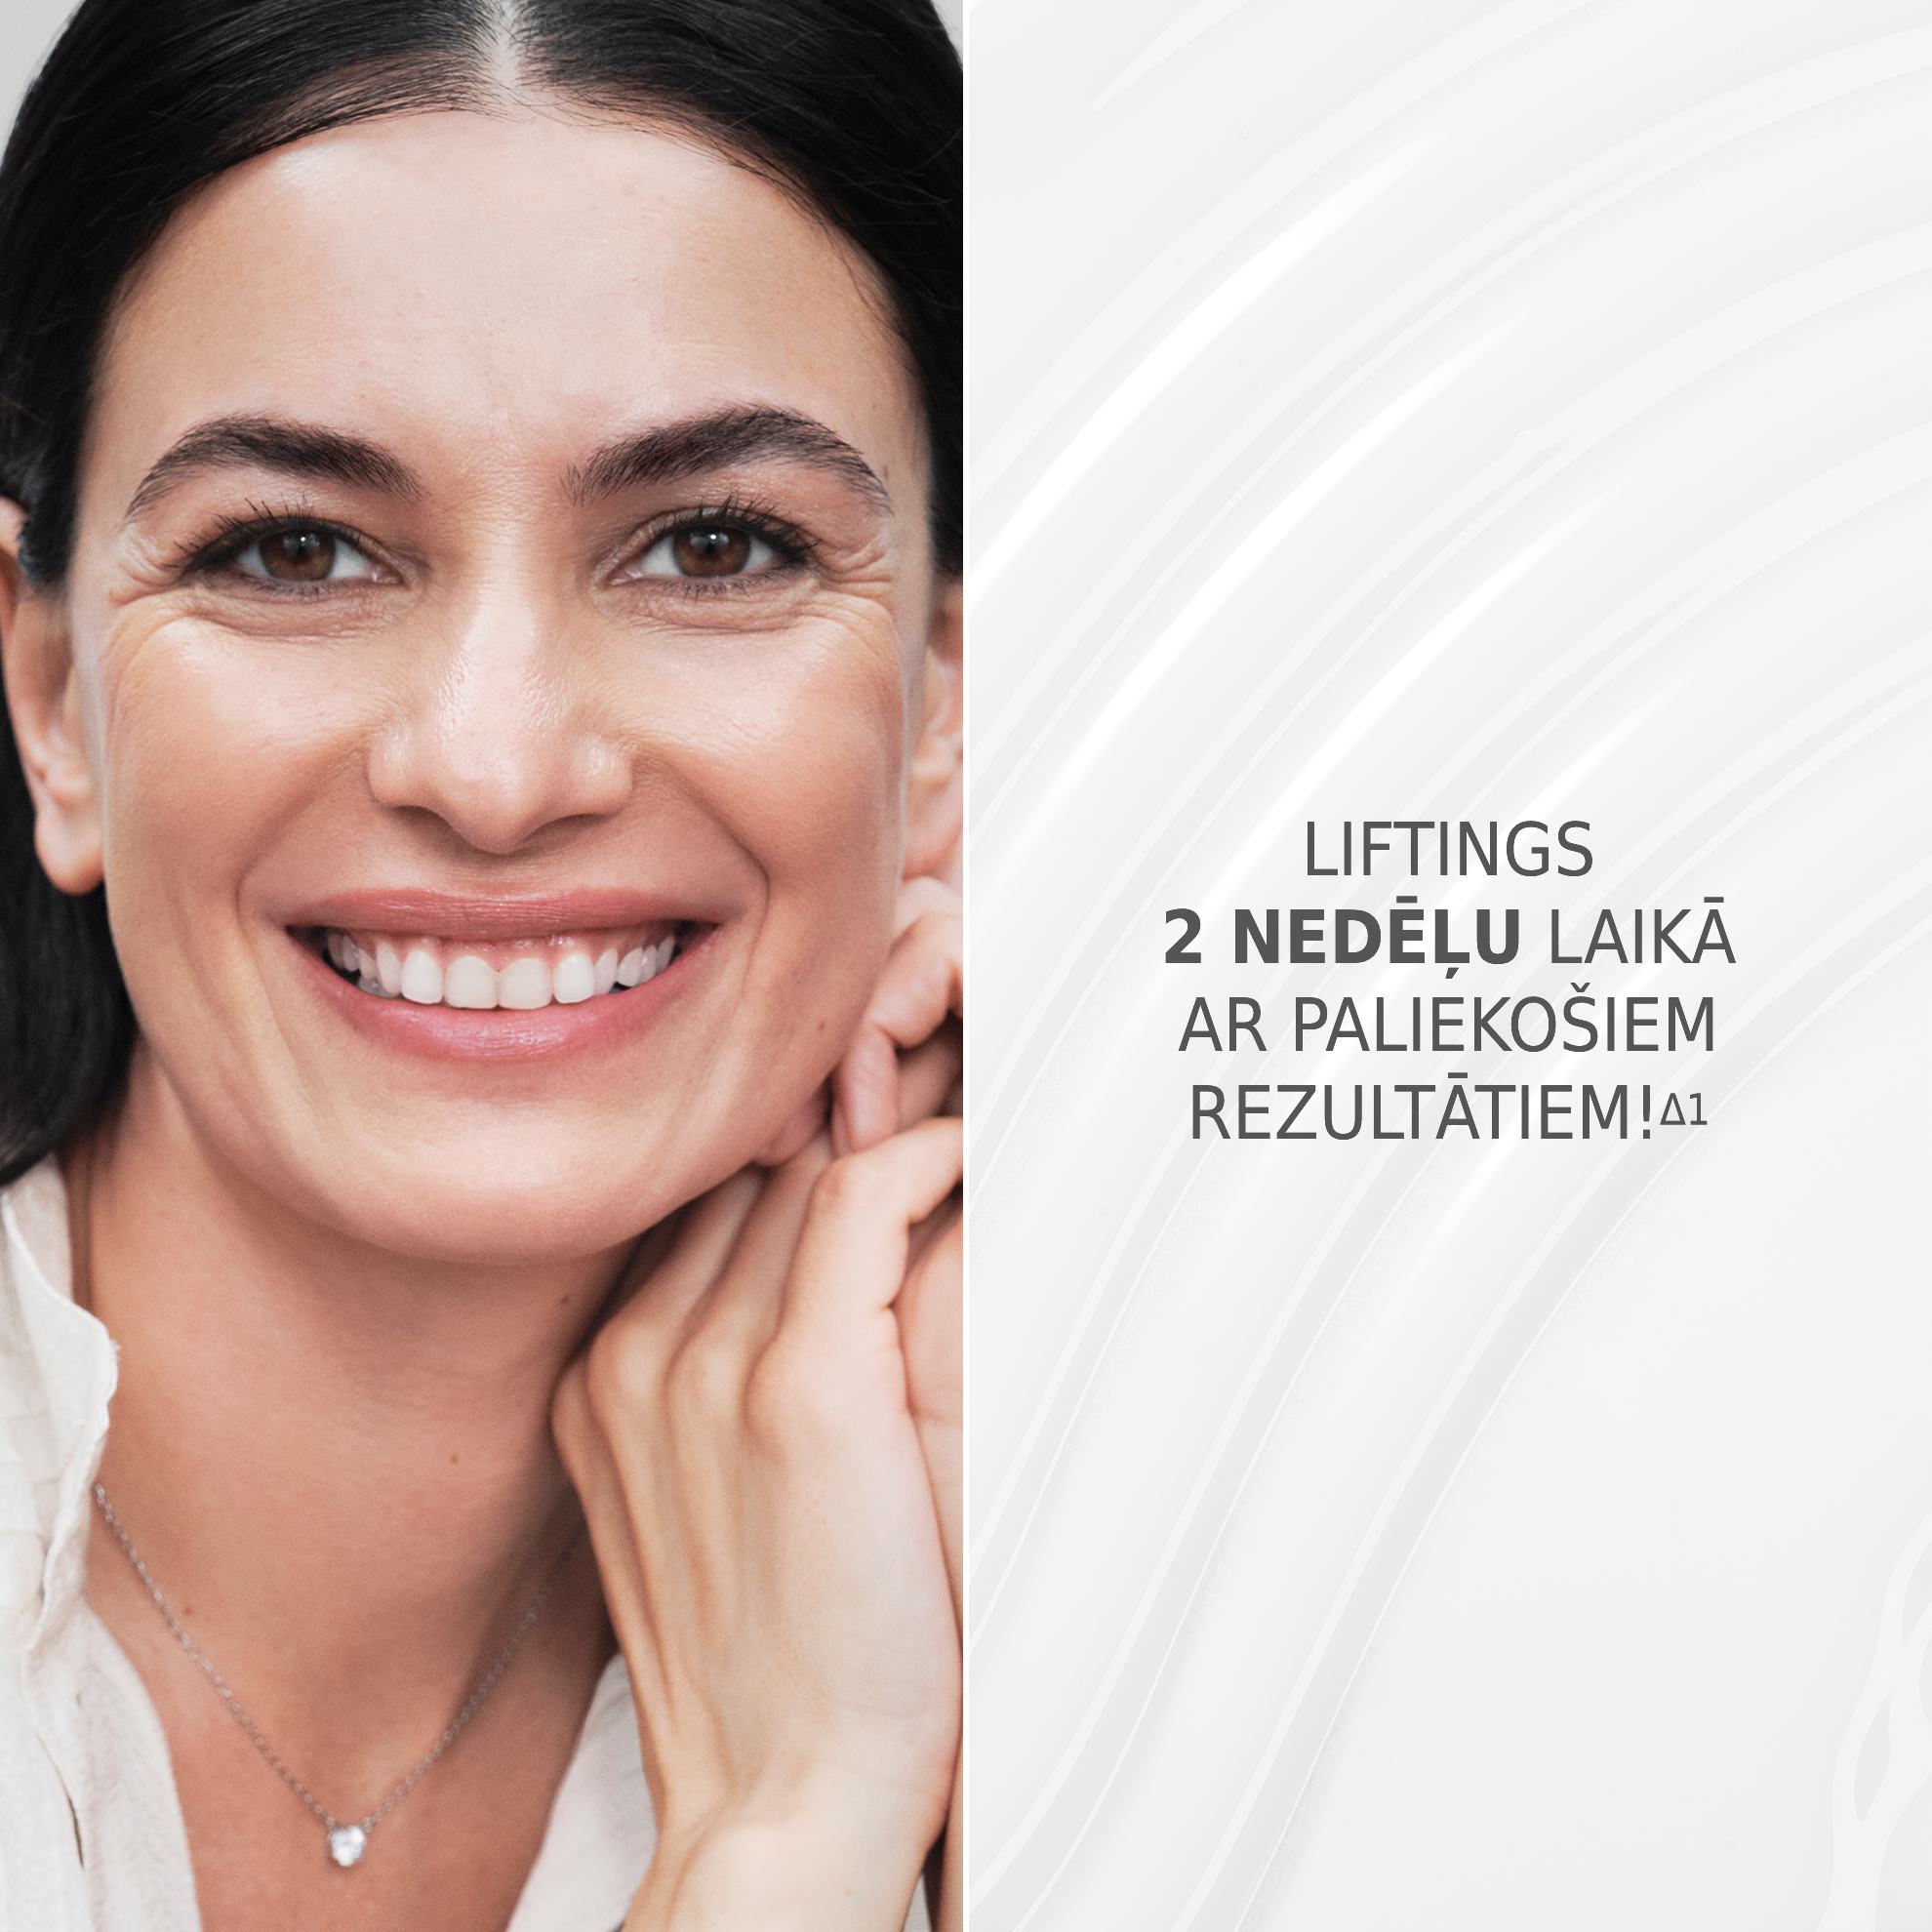 https://media-cdn.oriflame.com/productImage?externalMediaId=product-management-media%2fProducts%2f43691%2fLV%2f43691_2.png&id=17605630&version=2